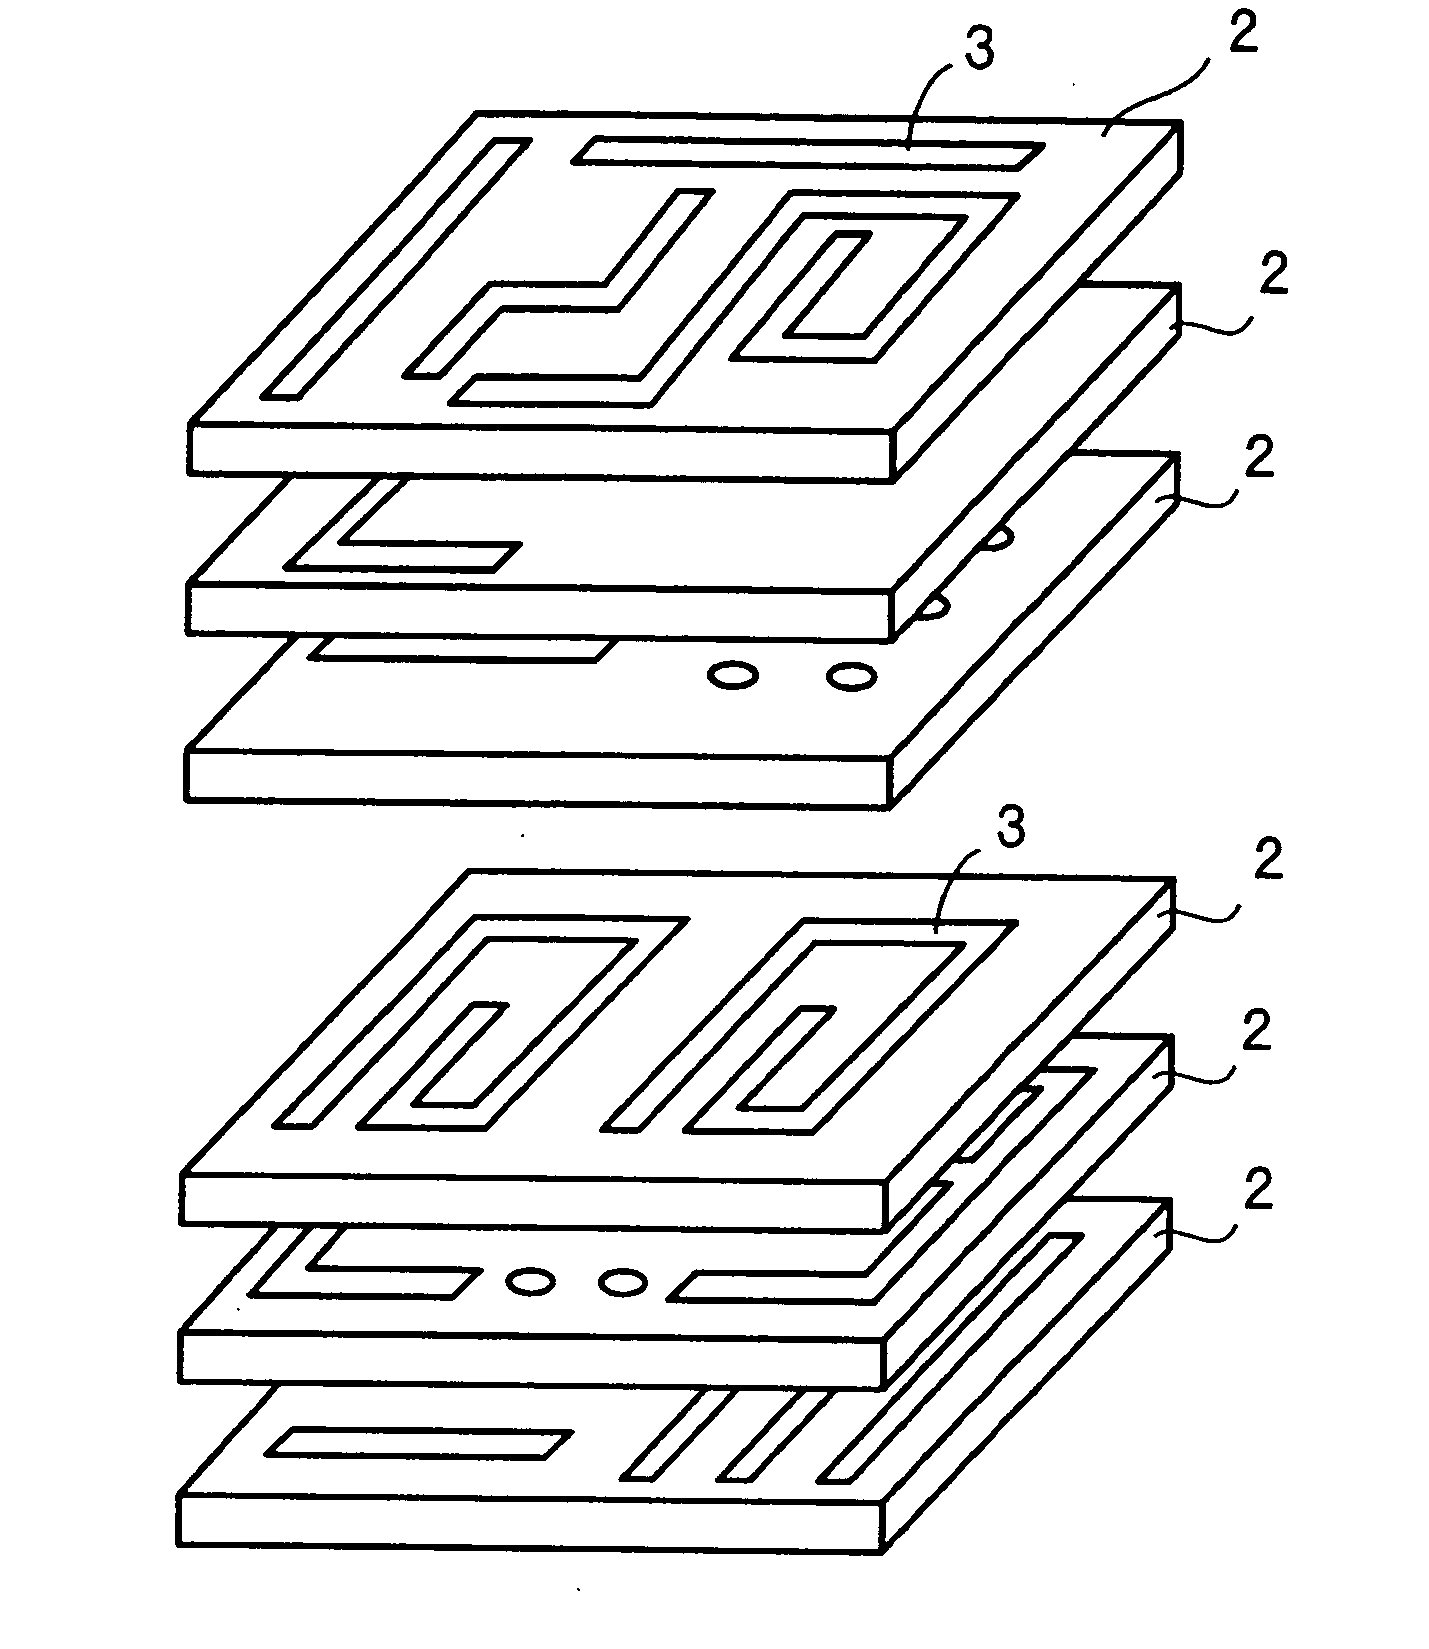 Multilayer ceramic substrate and method for manufacture thereof